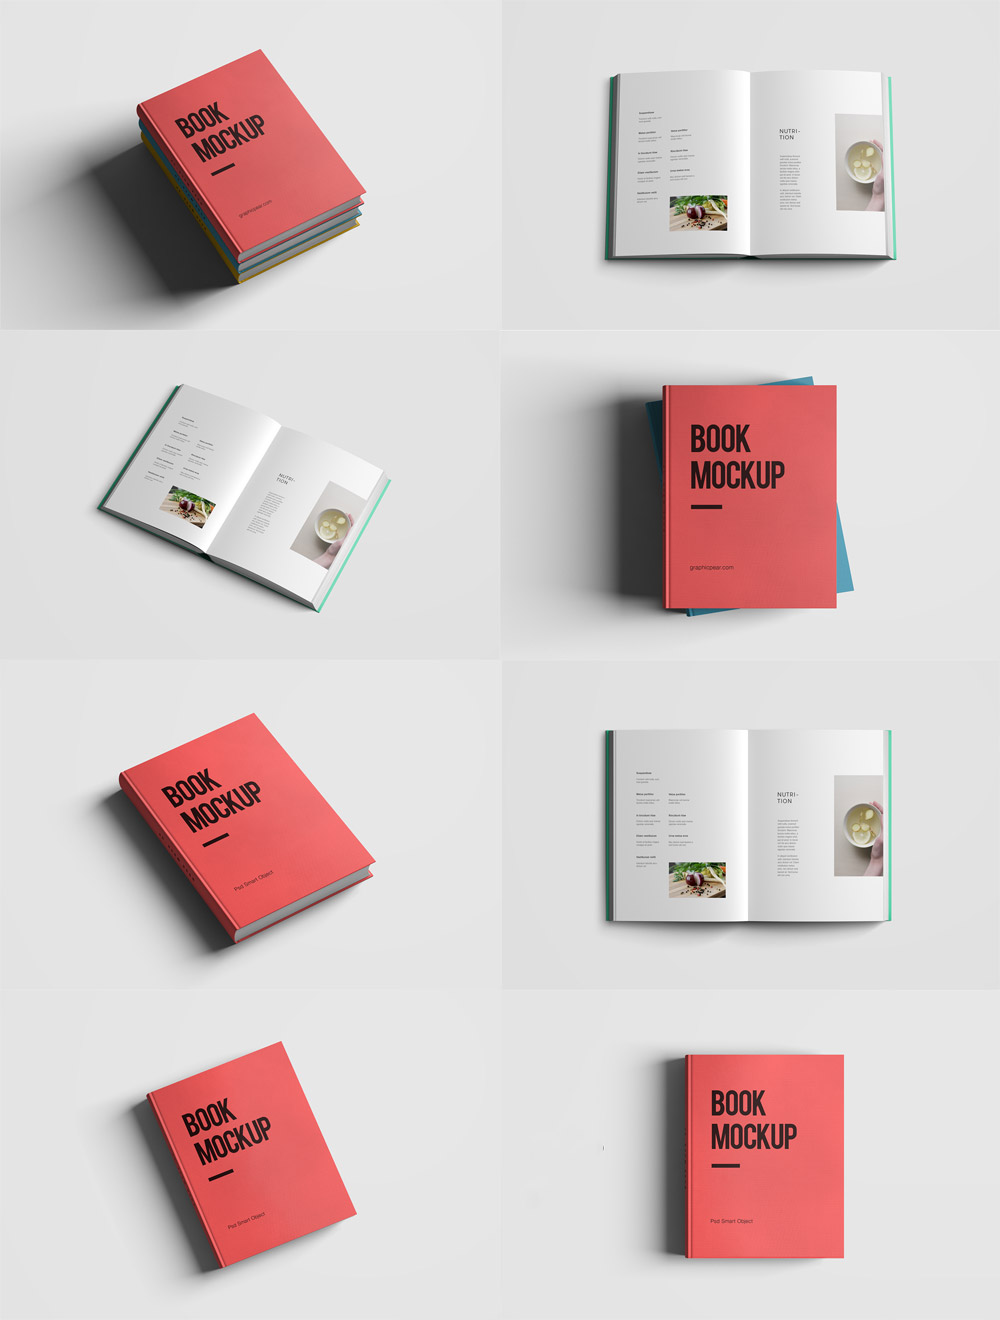 Download Realistic Book Mockup Template Pack Free PSD Download - Download PSD